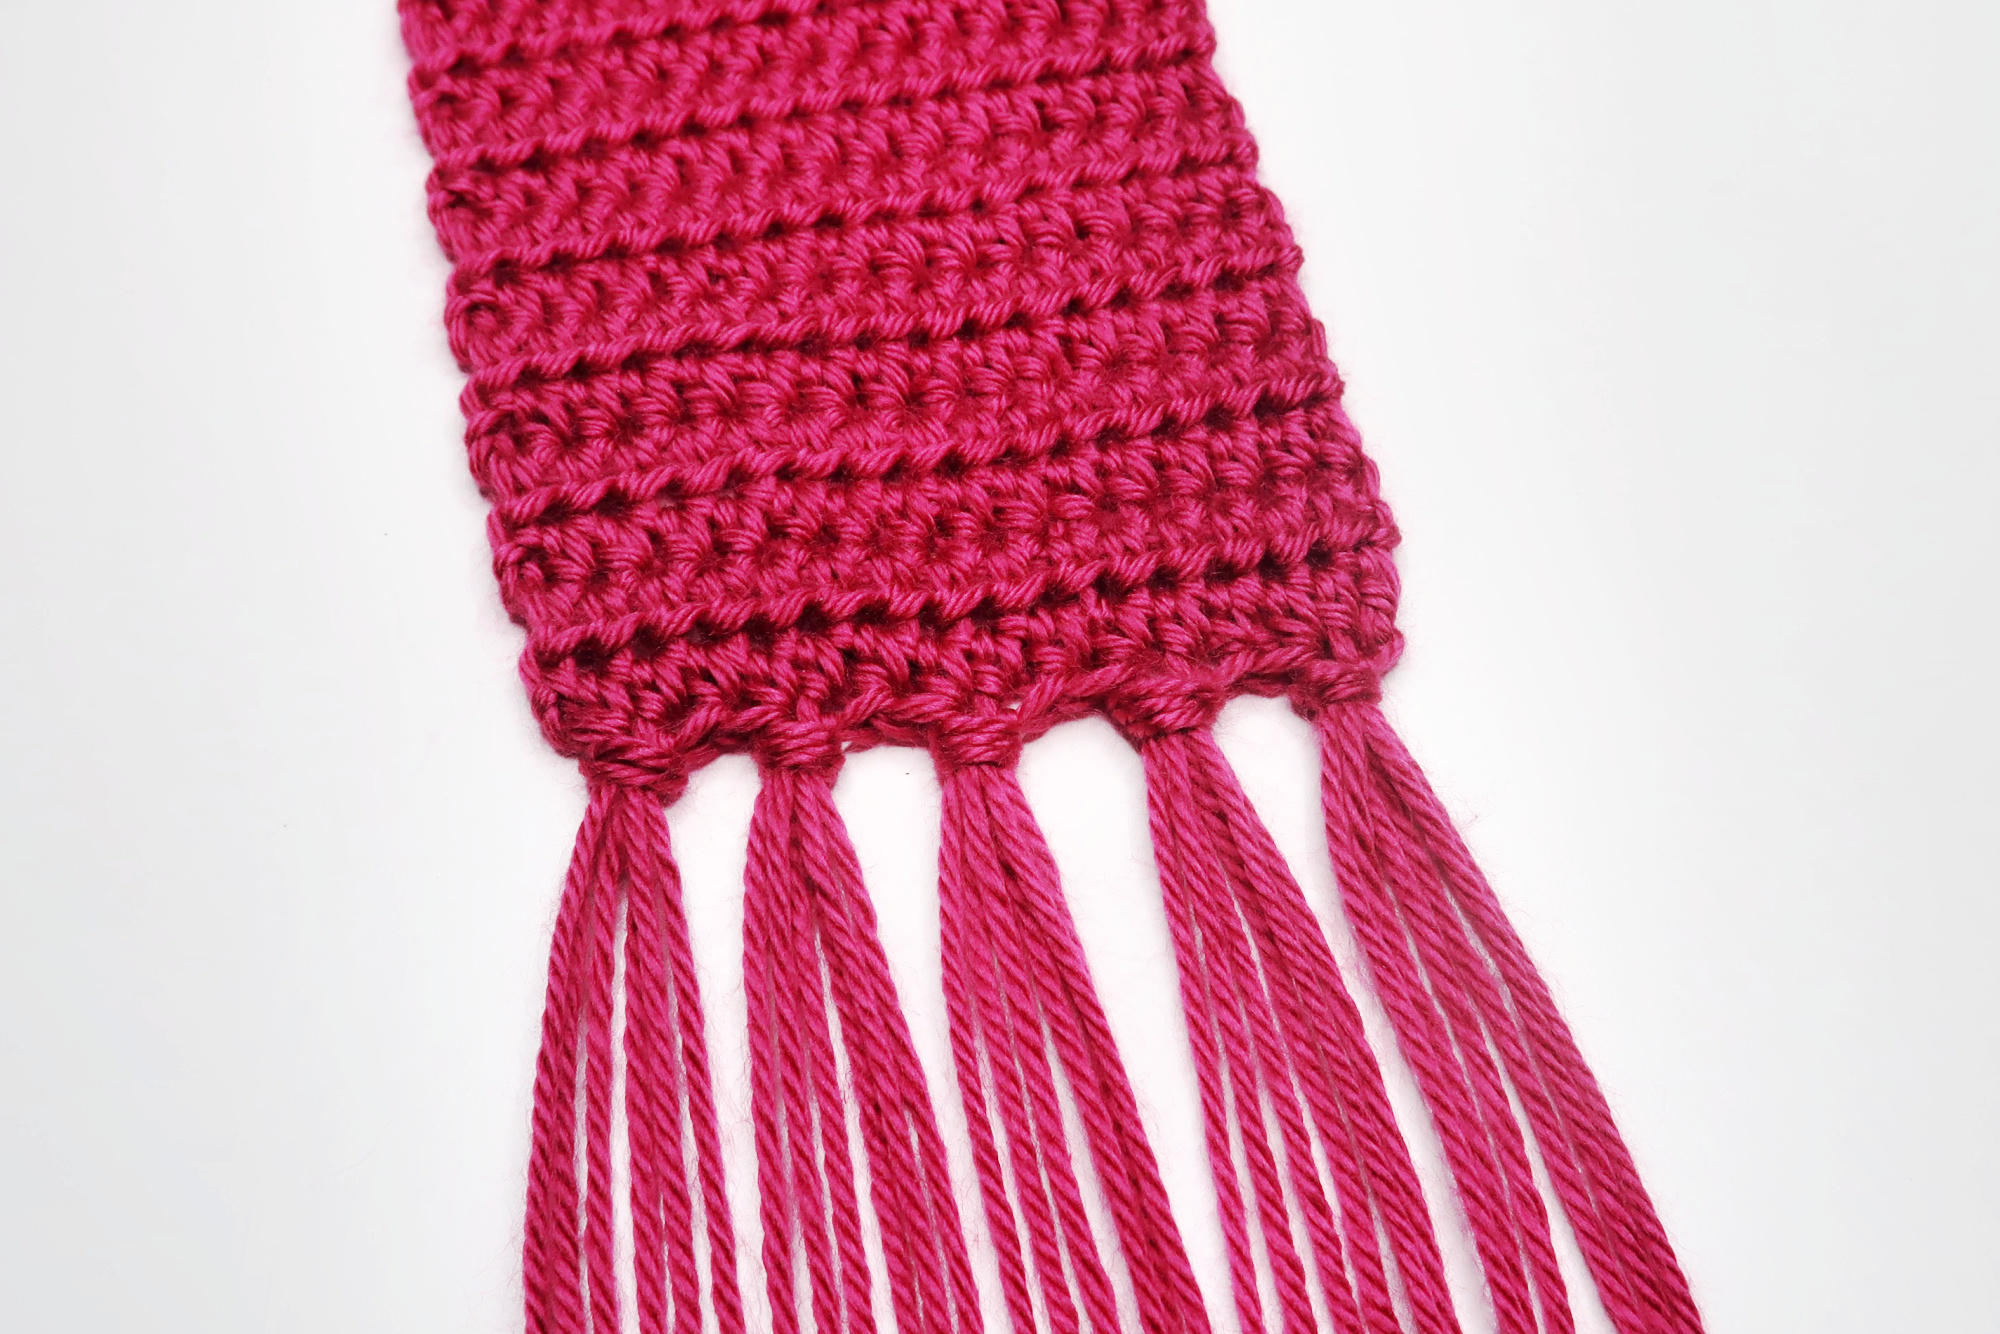 Simple Half Double Crochet Scarf - Looped and Knotted